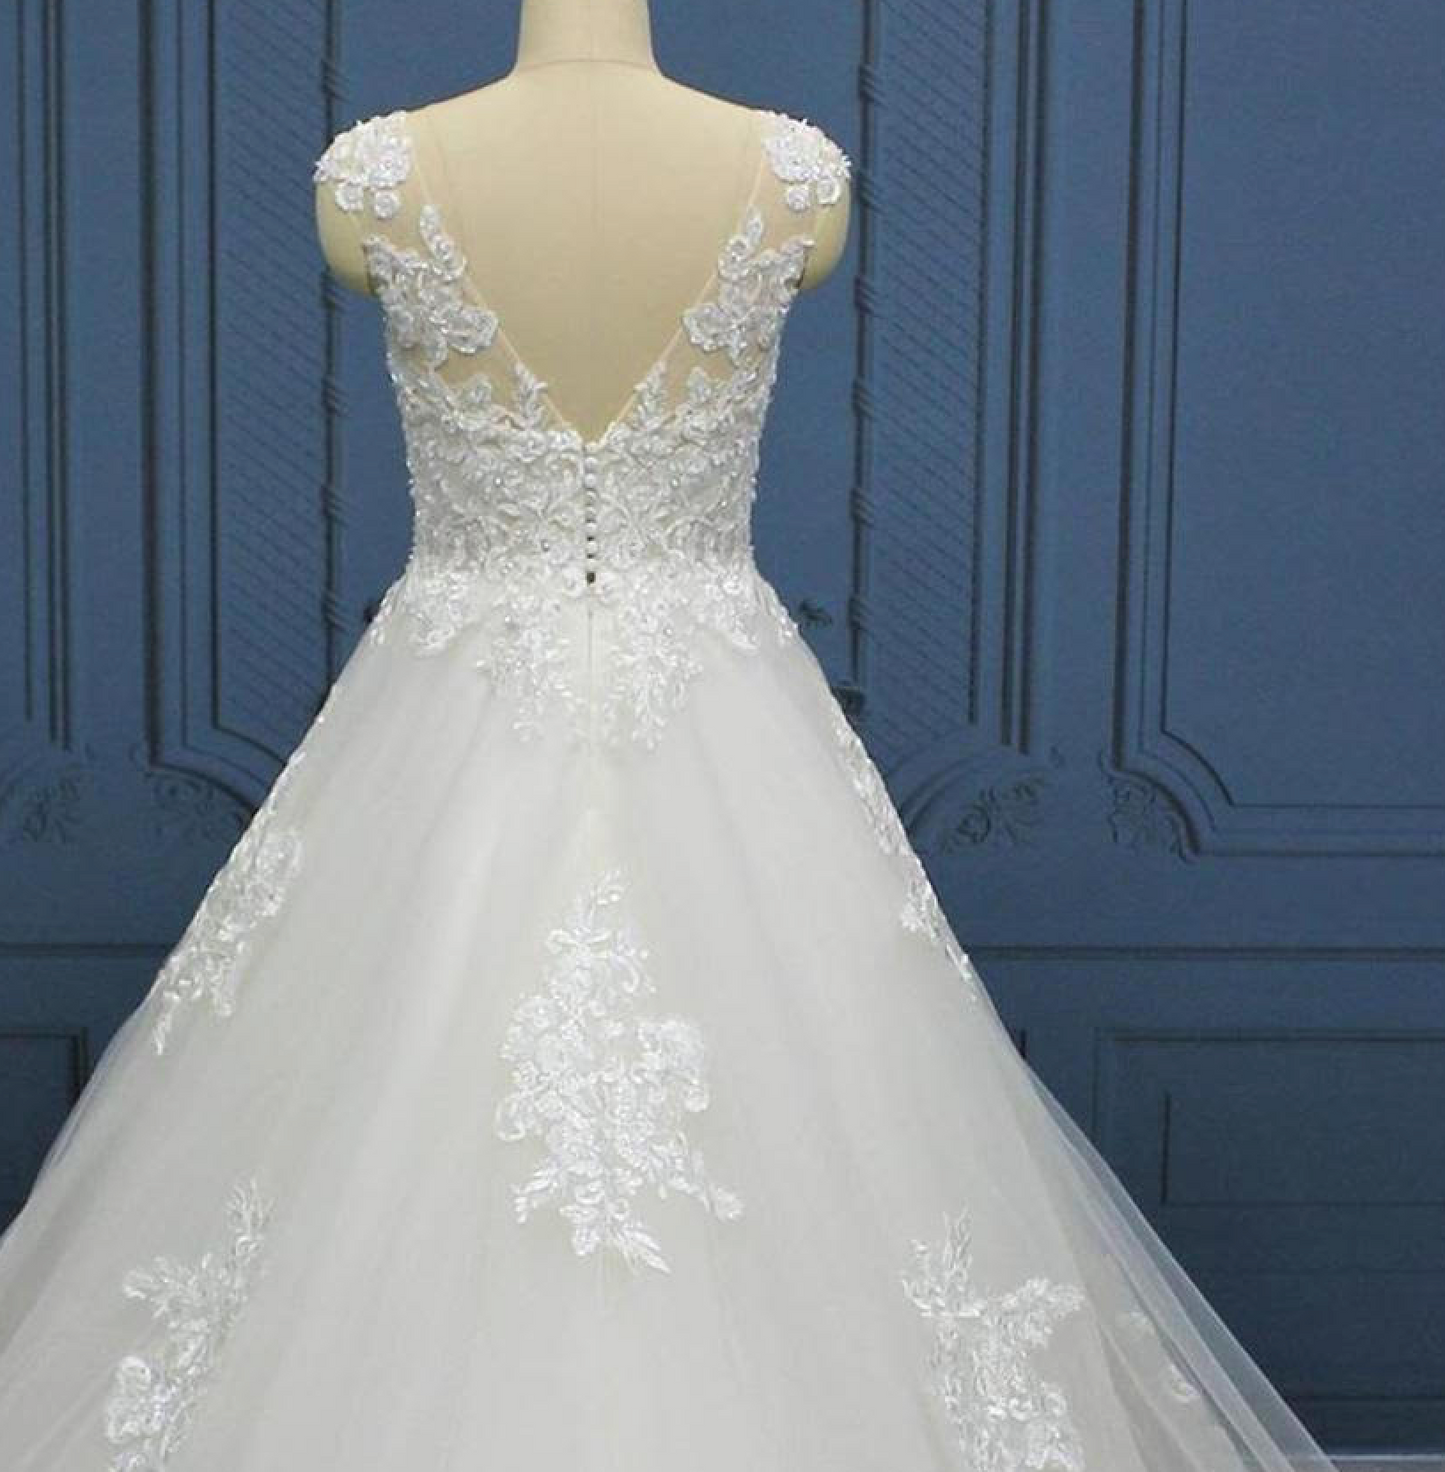 Illusion A Line Lace Tulle Bridal Wedding Dress – TulleLux Bridal ...